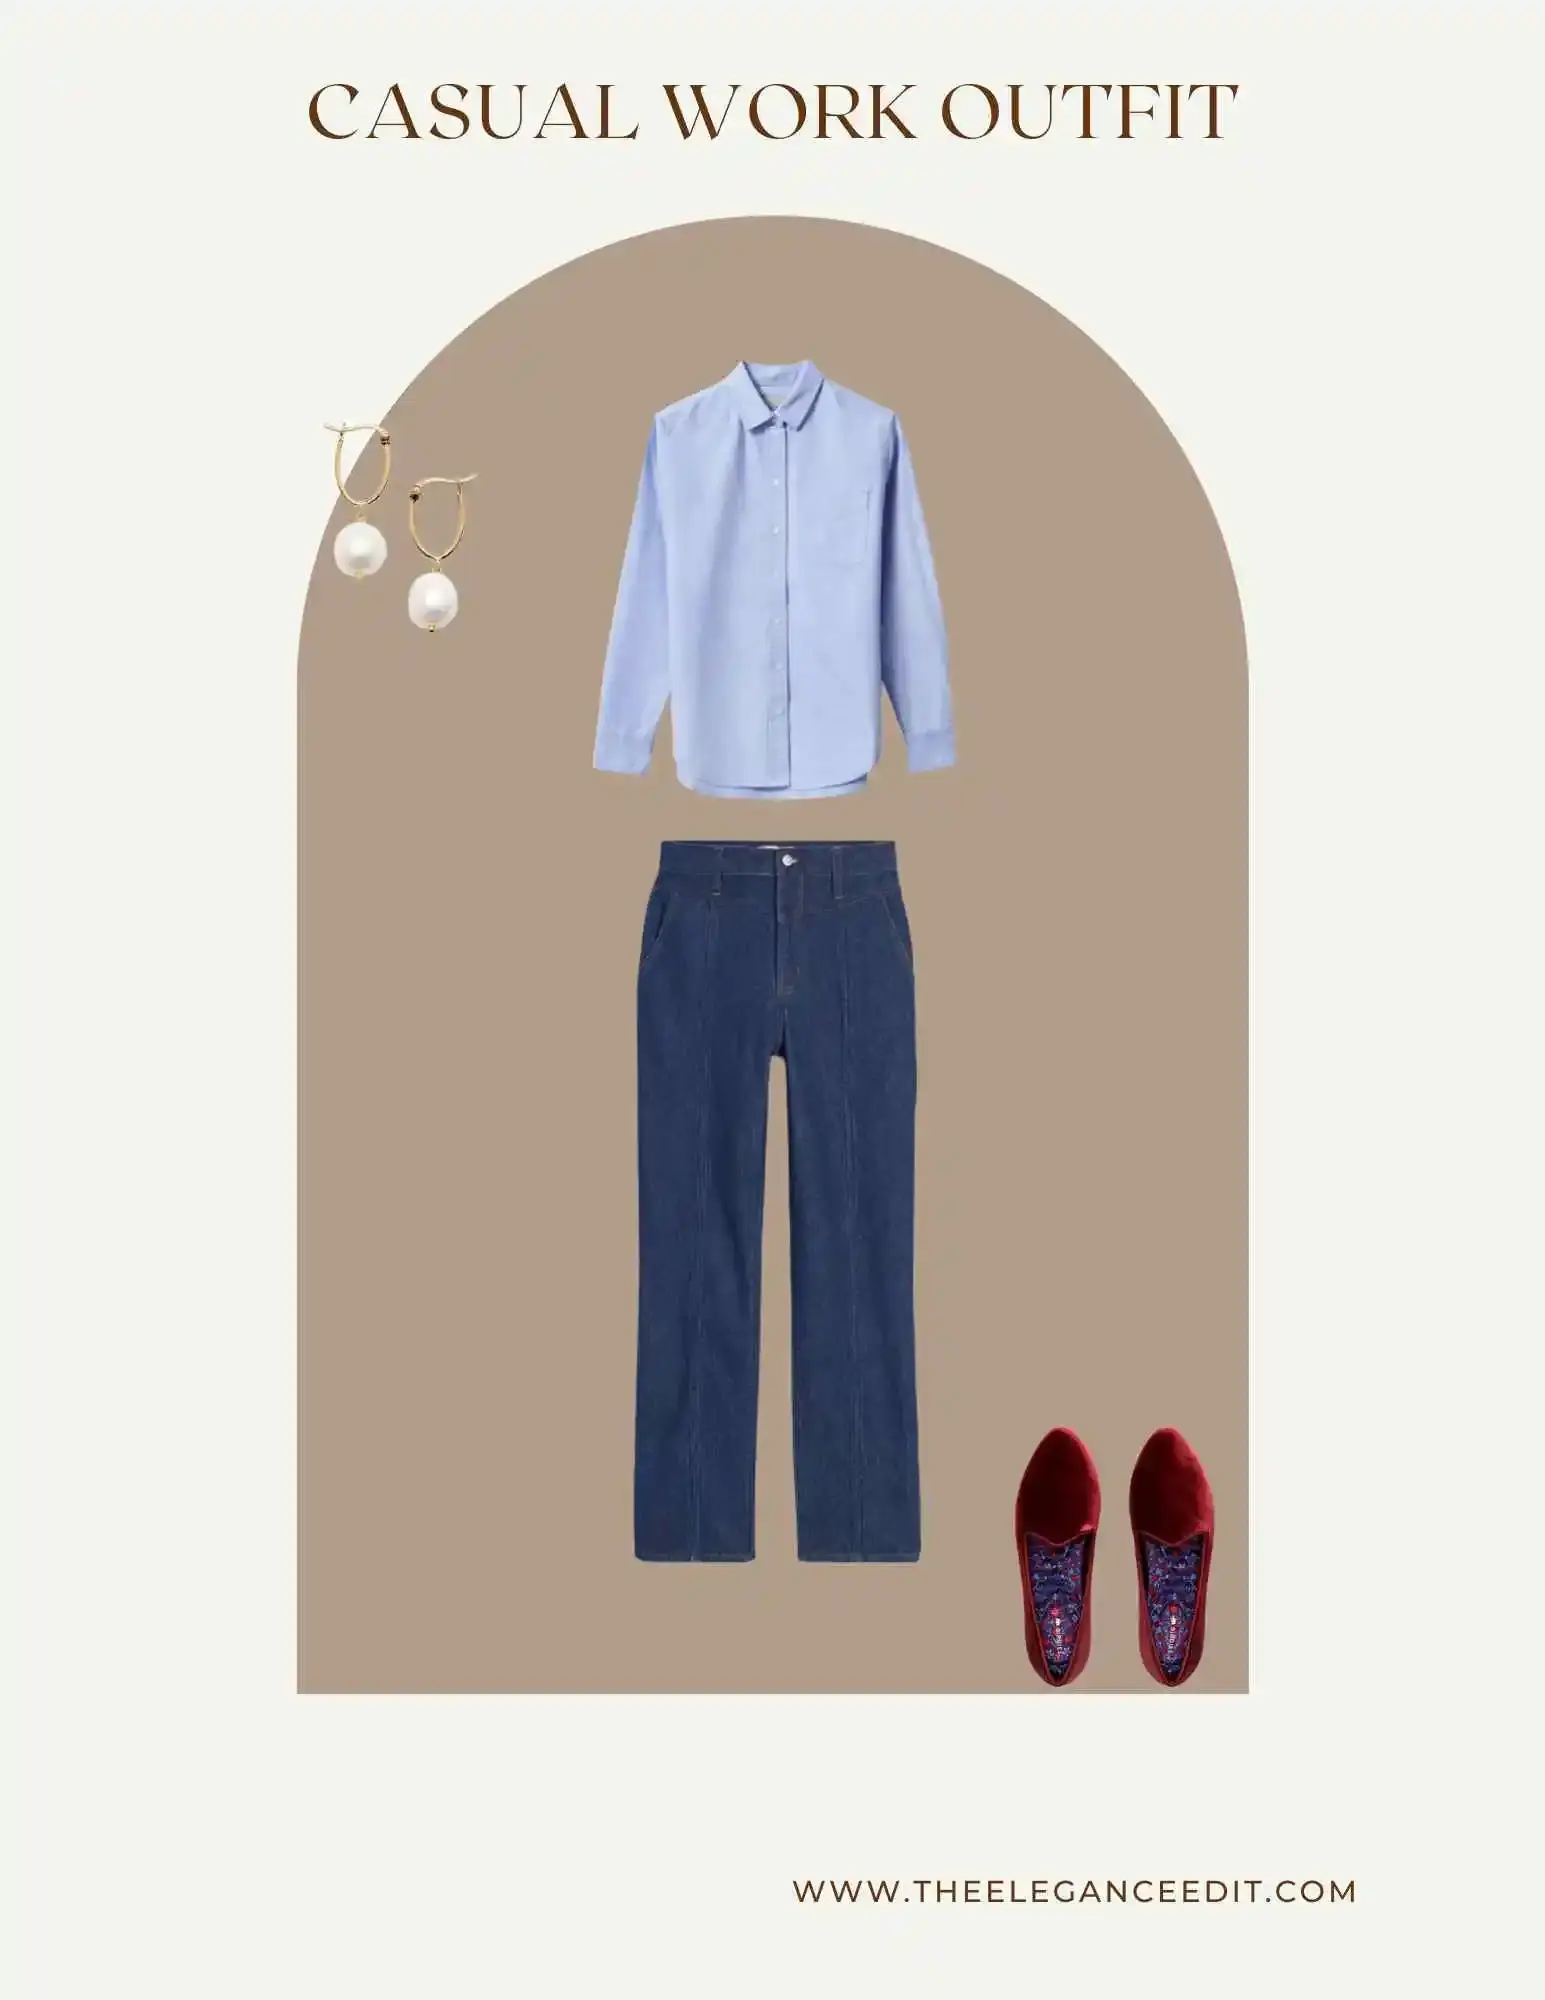 Jeans and oxford shirt work outfit idea